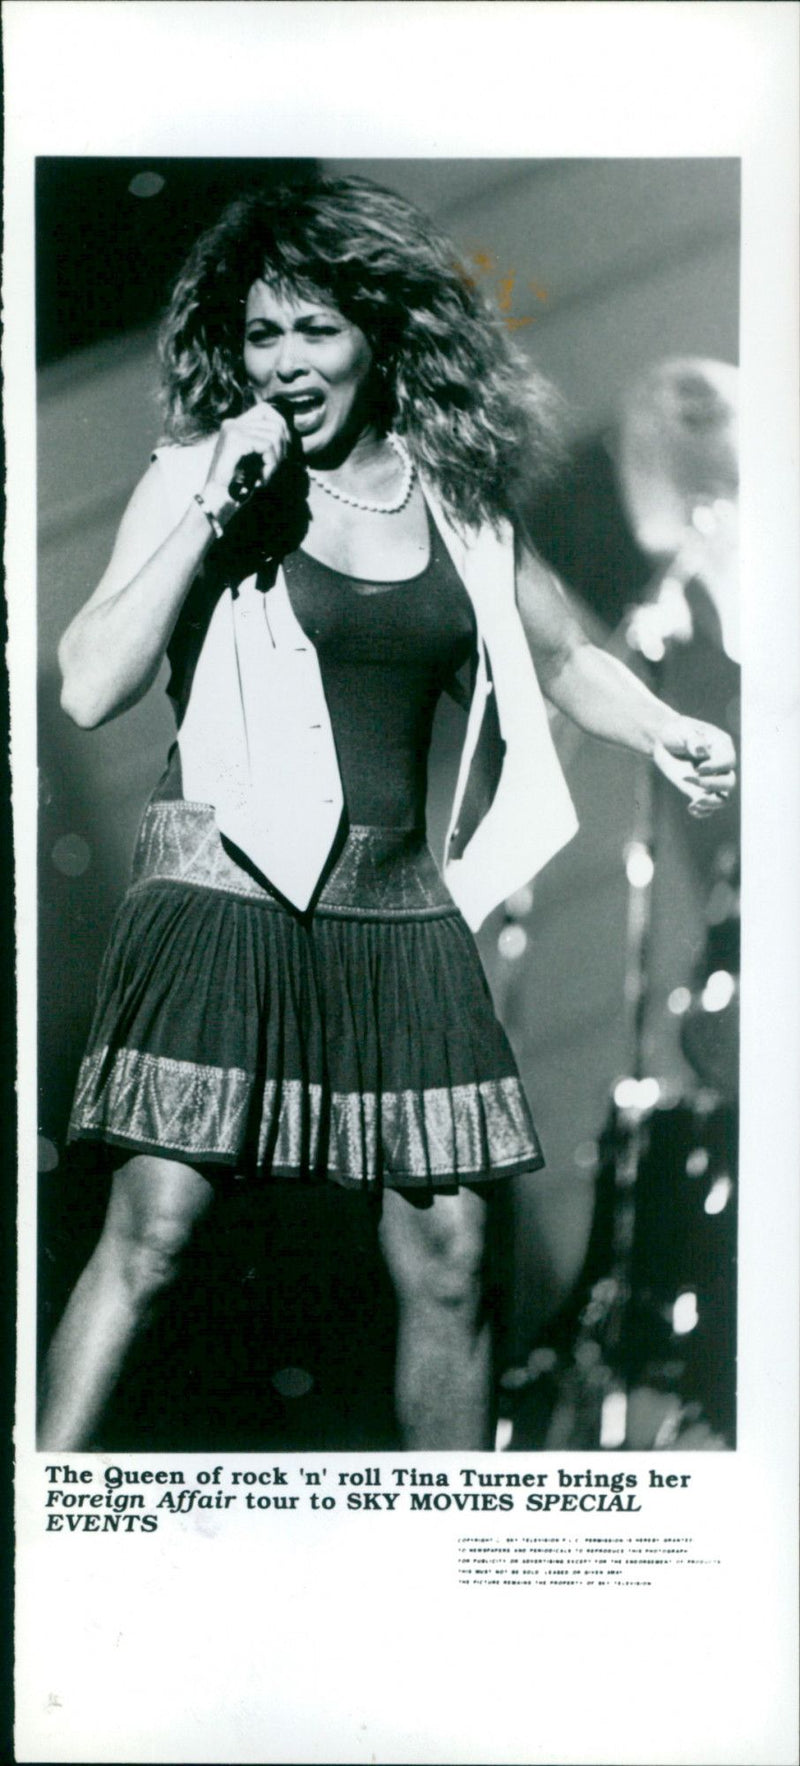 Tina Turner performs at a SKY MOVIES SPECIAL EVENTS FOR PUBLICIT MUSL in Oxford, England. - Vintage Photograph